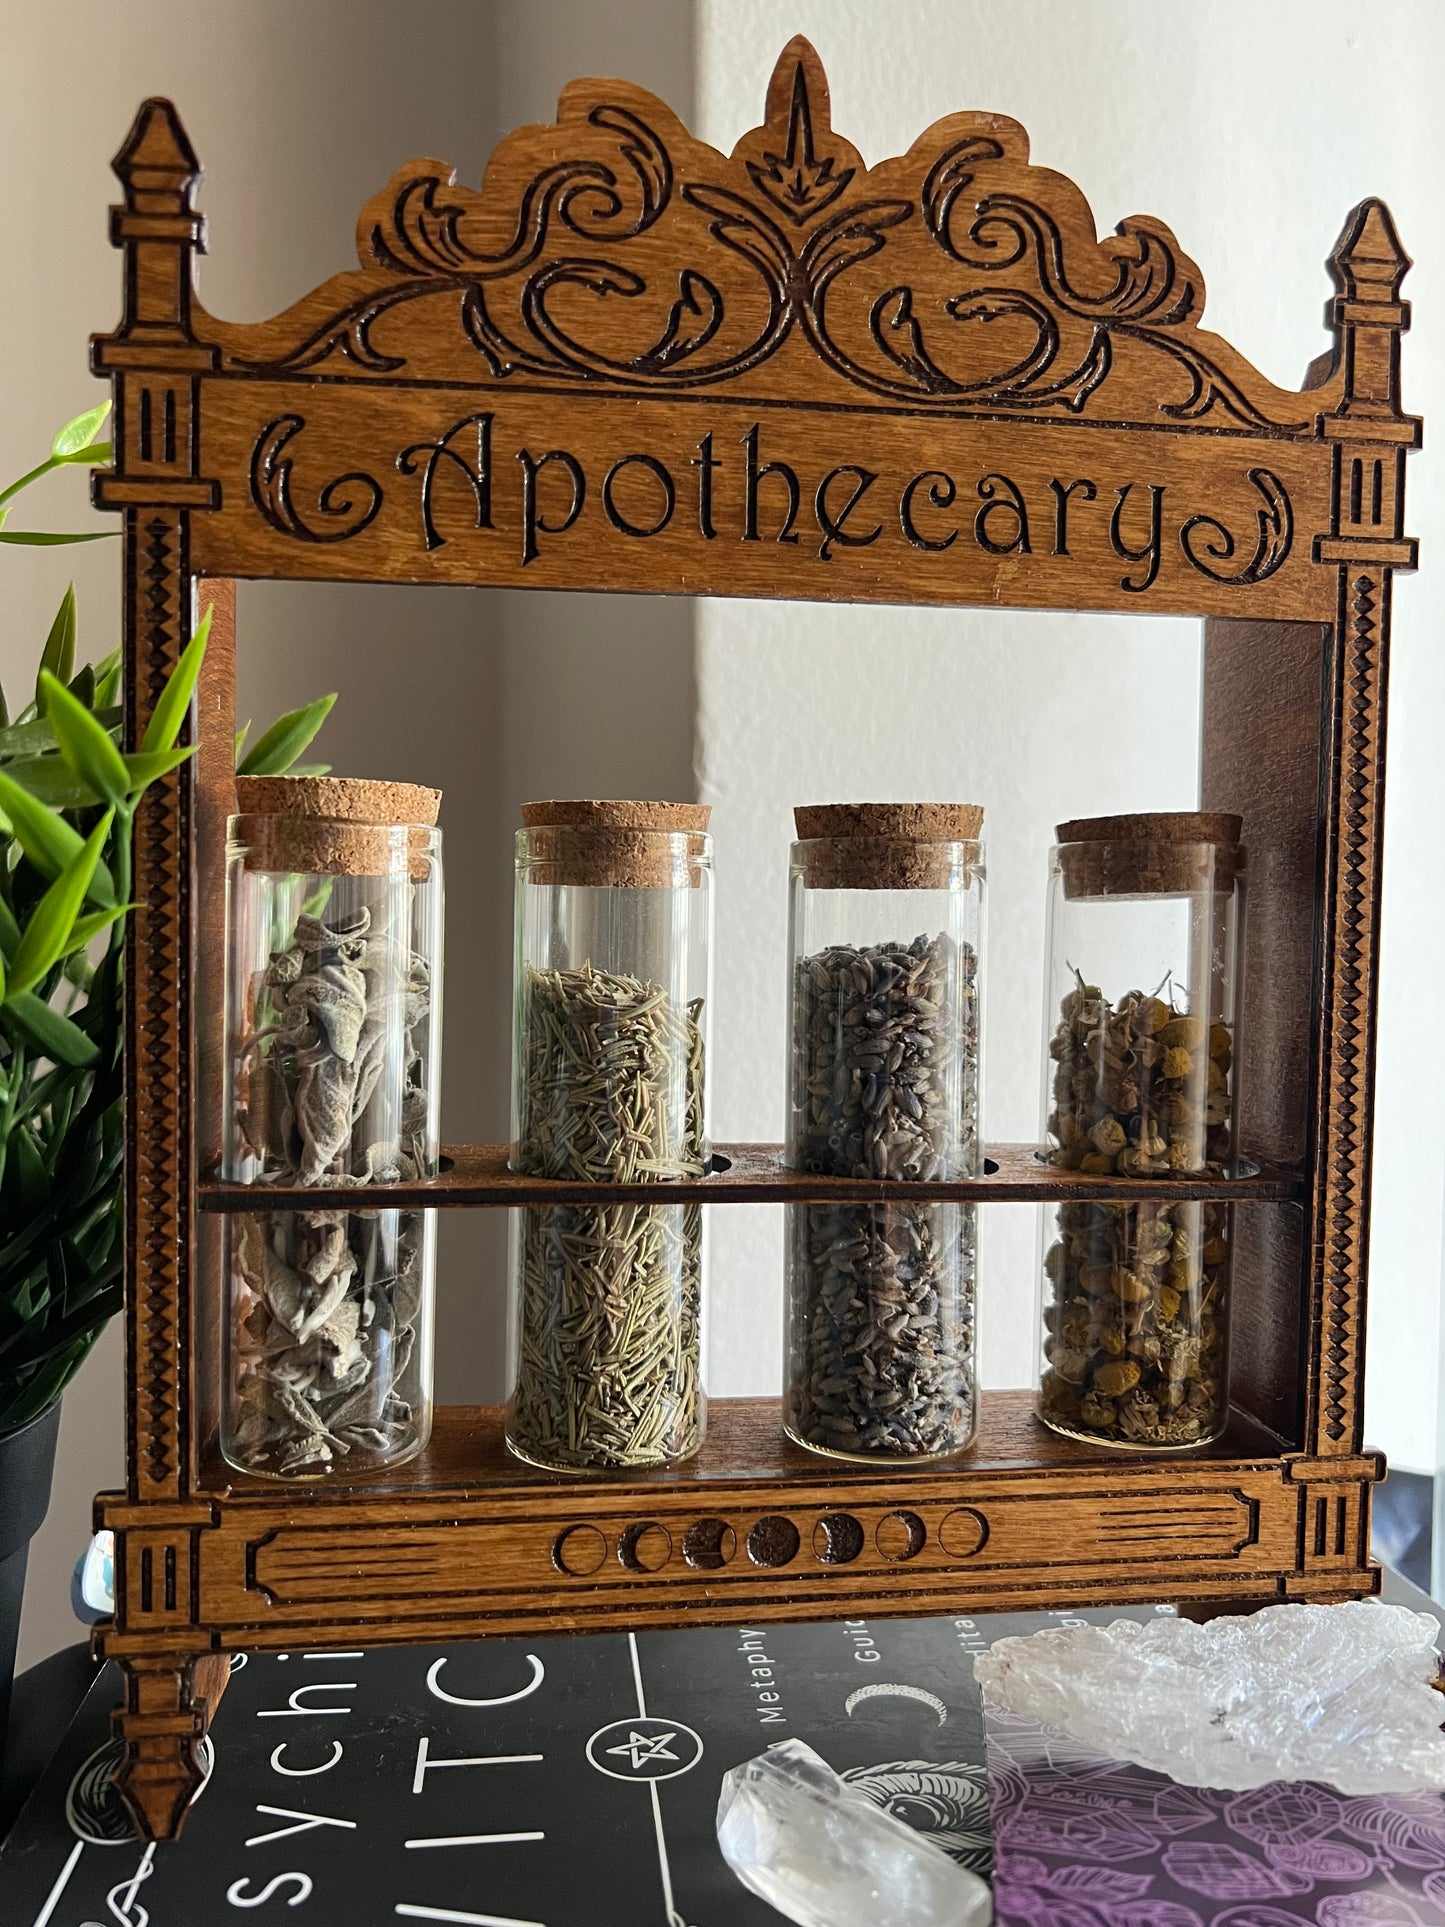 Apothecary stand for herbs or potions